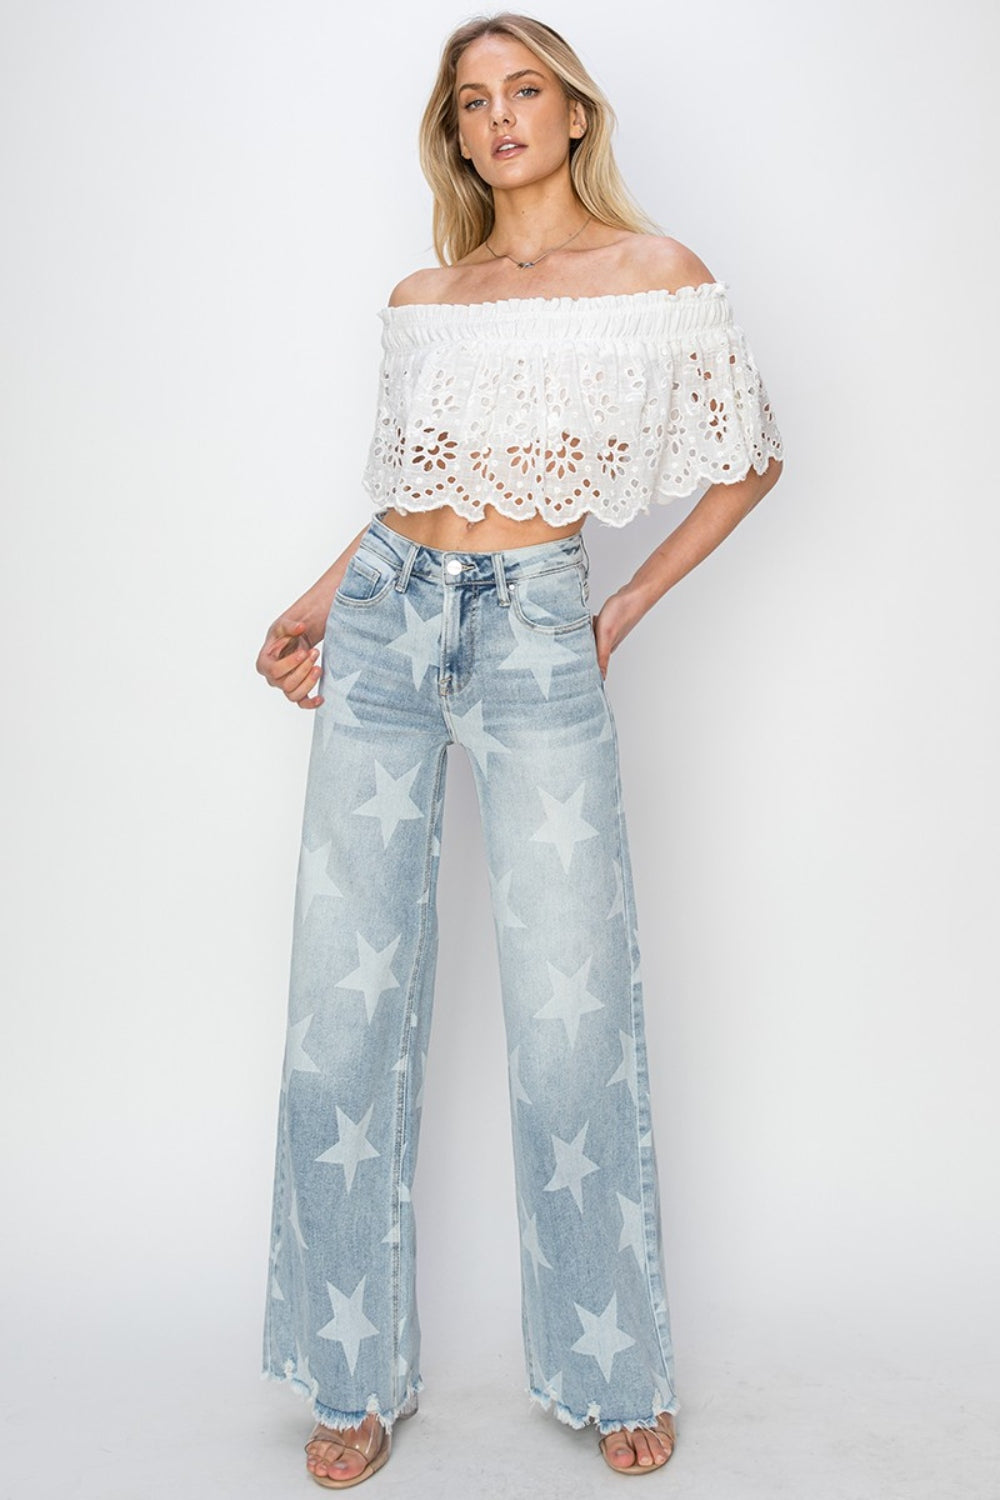 The Raw Hem Star Wide Leg Jeans are a fashionable and eye-catching choice for those looking to make a statement with their outfit. The raw hem detail gives these jeans a casual and edgy vibe, while the star embellishments add a touch of whimsical charm. The wide leg silhouette offers a comfortable and flattering fit, making them a versatile piece that can be dressed up or down. S-3X